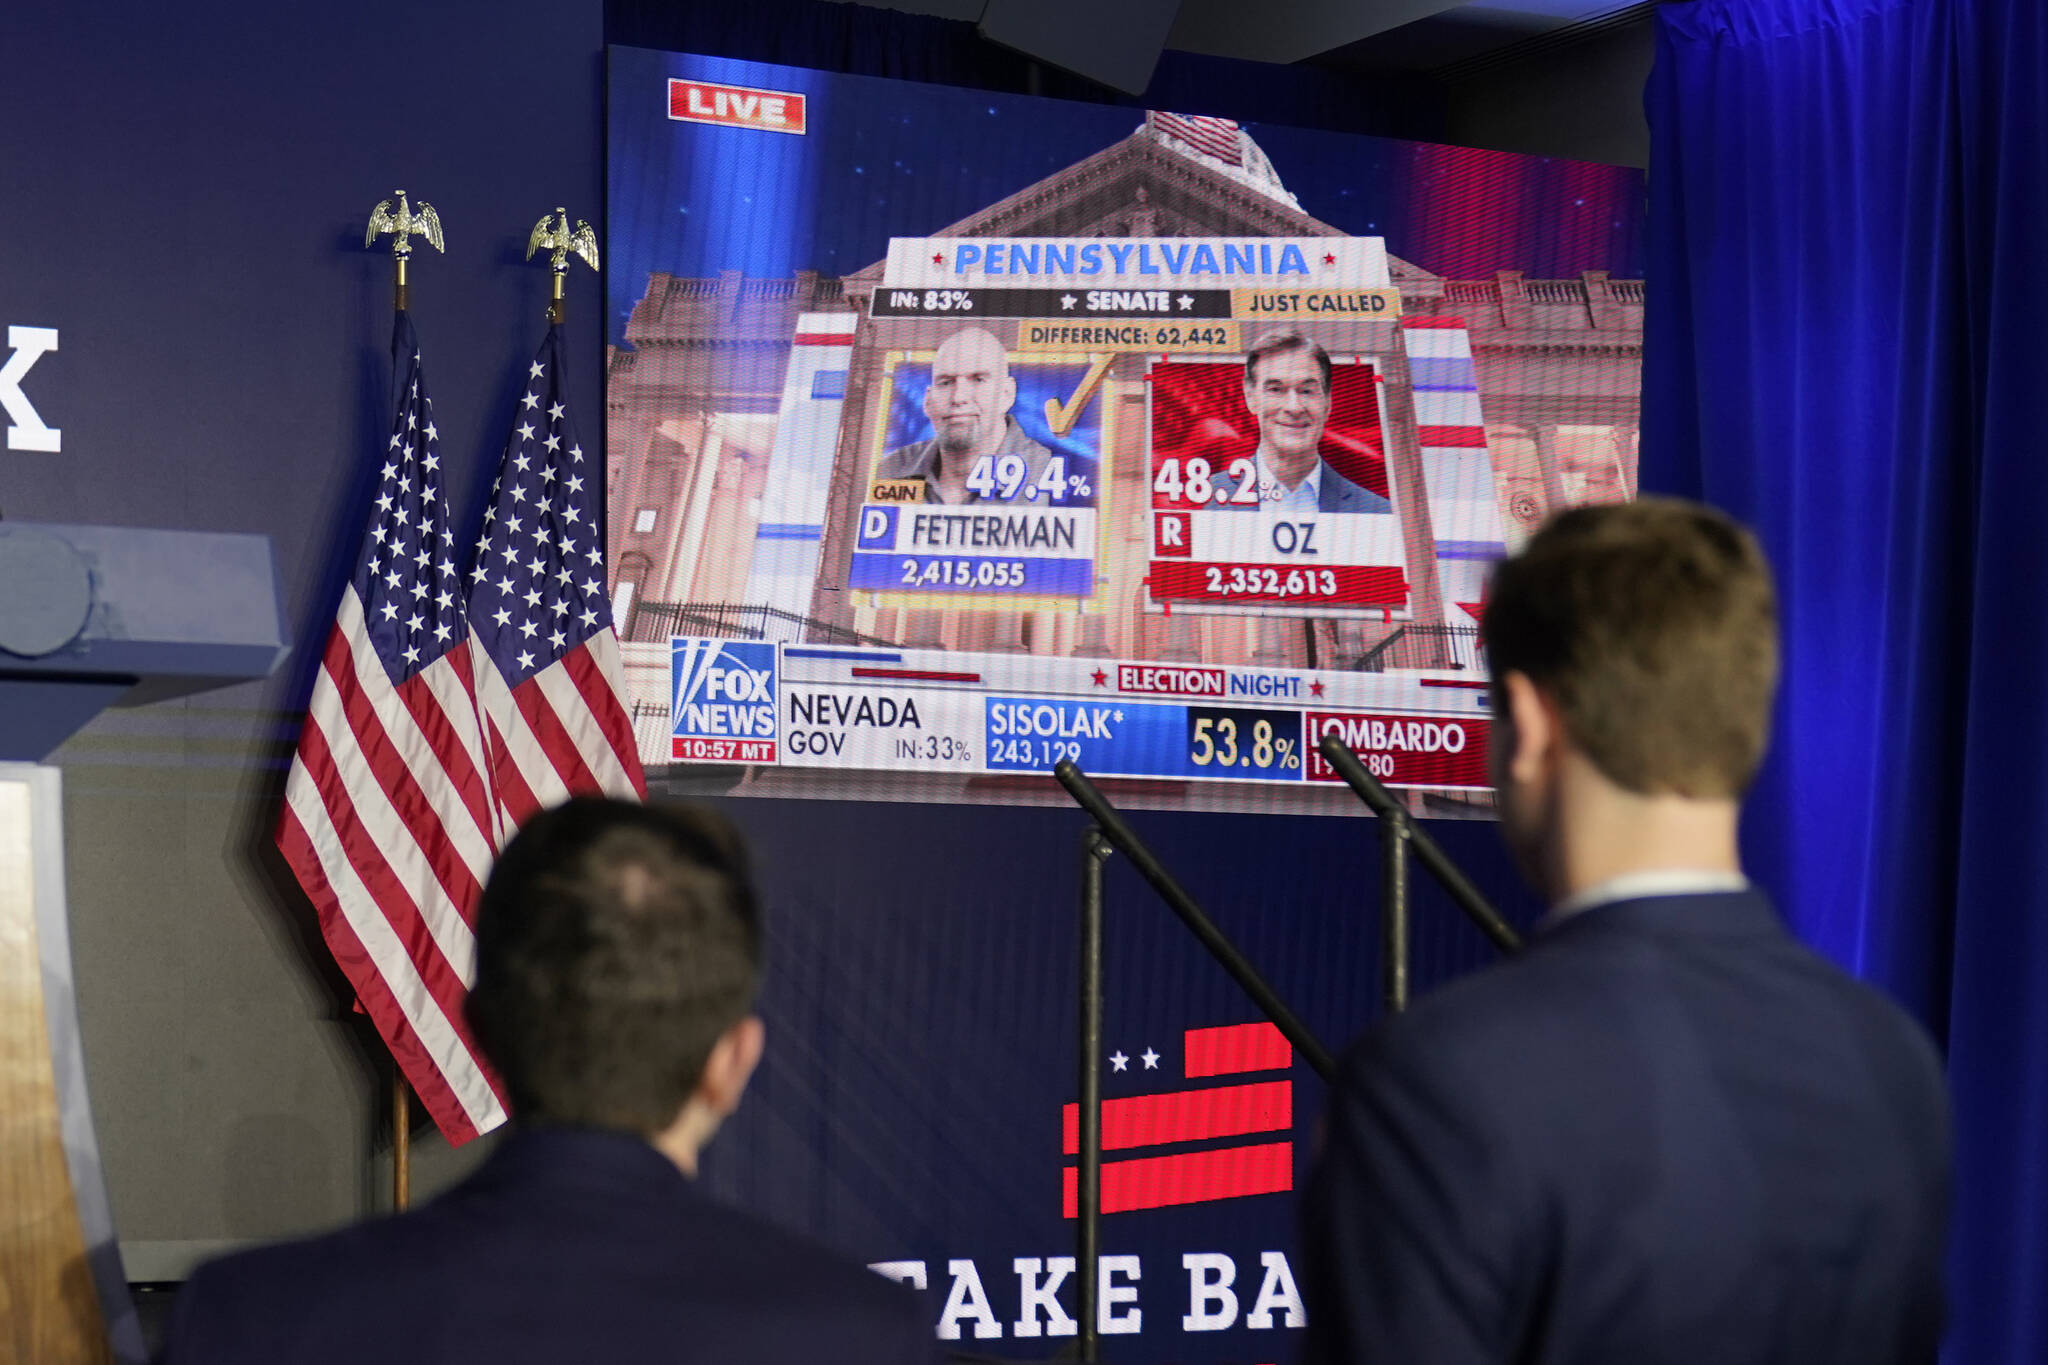 AP Photo / Alex Brandon
A cable network television broadcast displays information during the evening on the Pennsylvania Senate race with Democrat John Fetterman and Republican Dr. Mehmet Oz, at a hotel, Wednesday, Nov. 9, 2022, in Washington. (AP Photo / Alex Brandon)